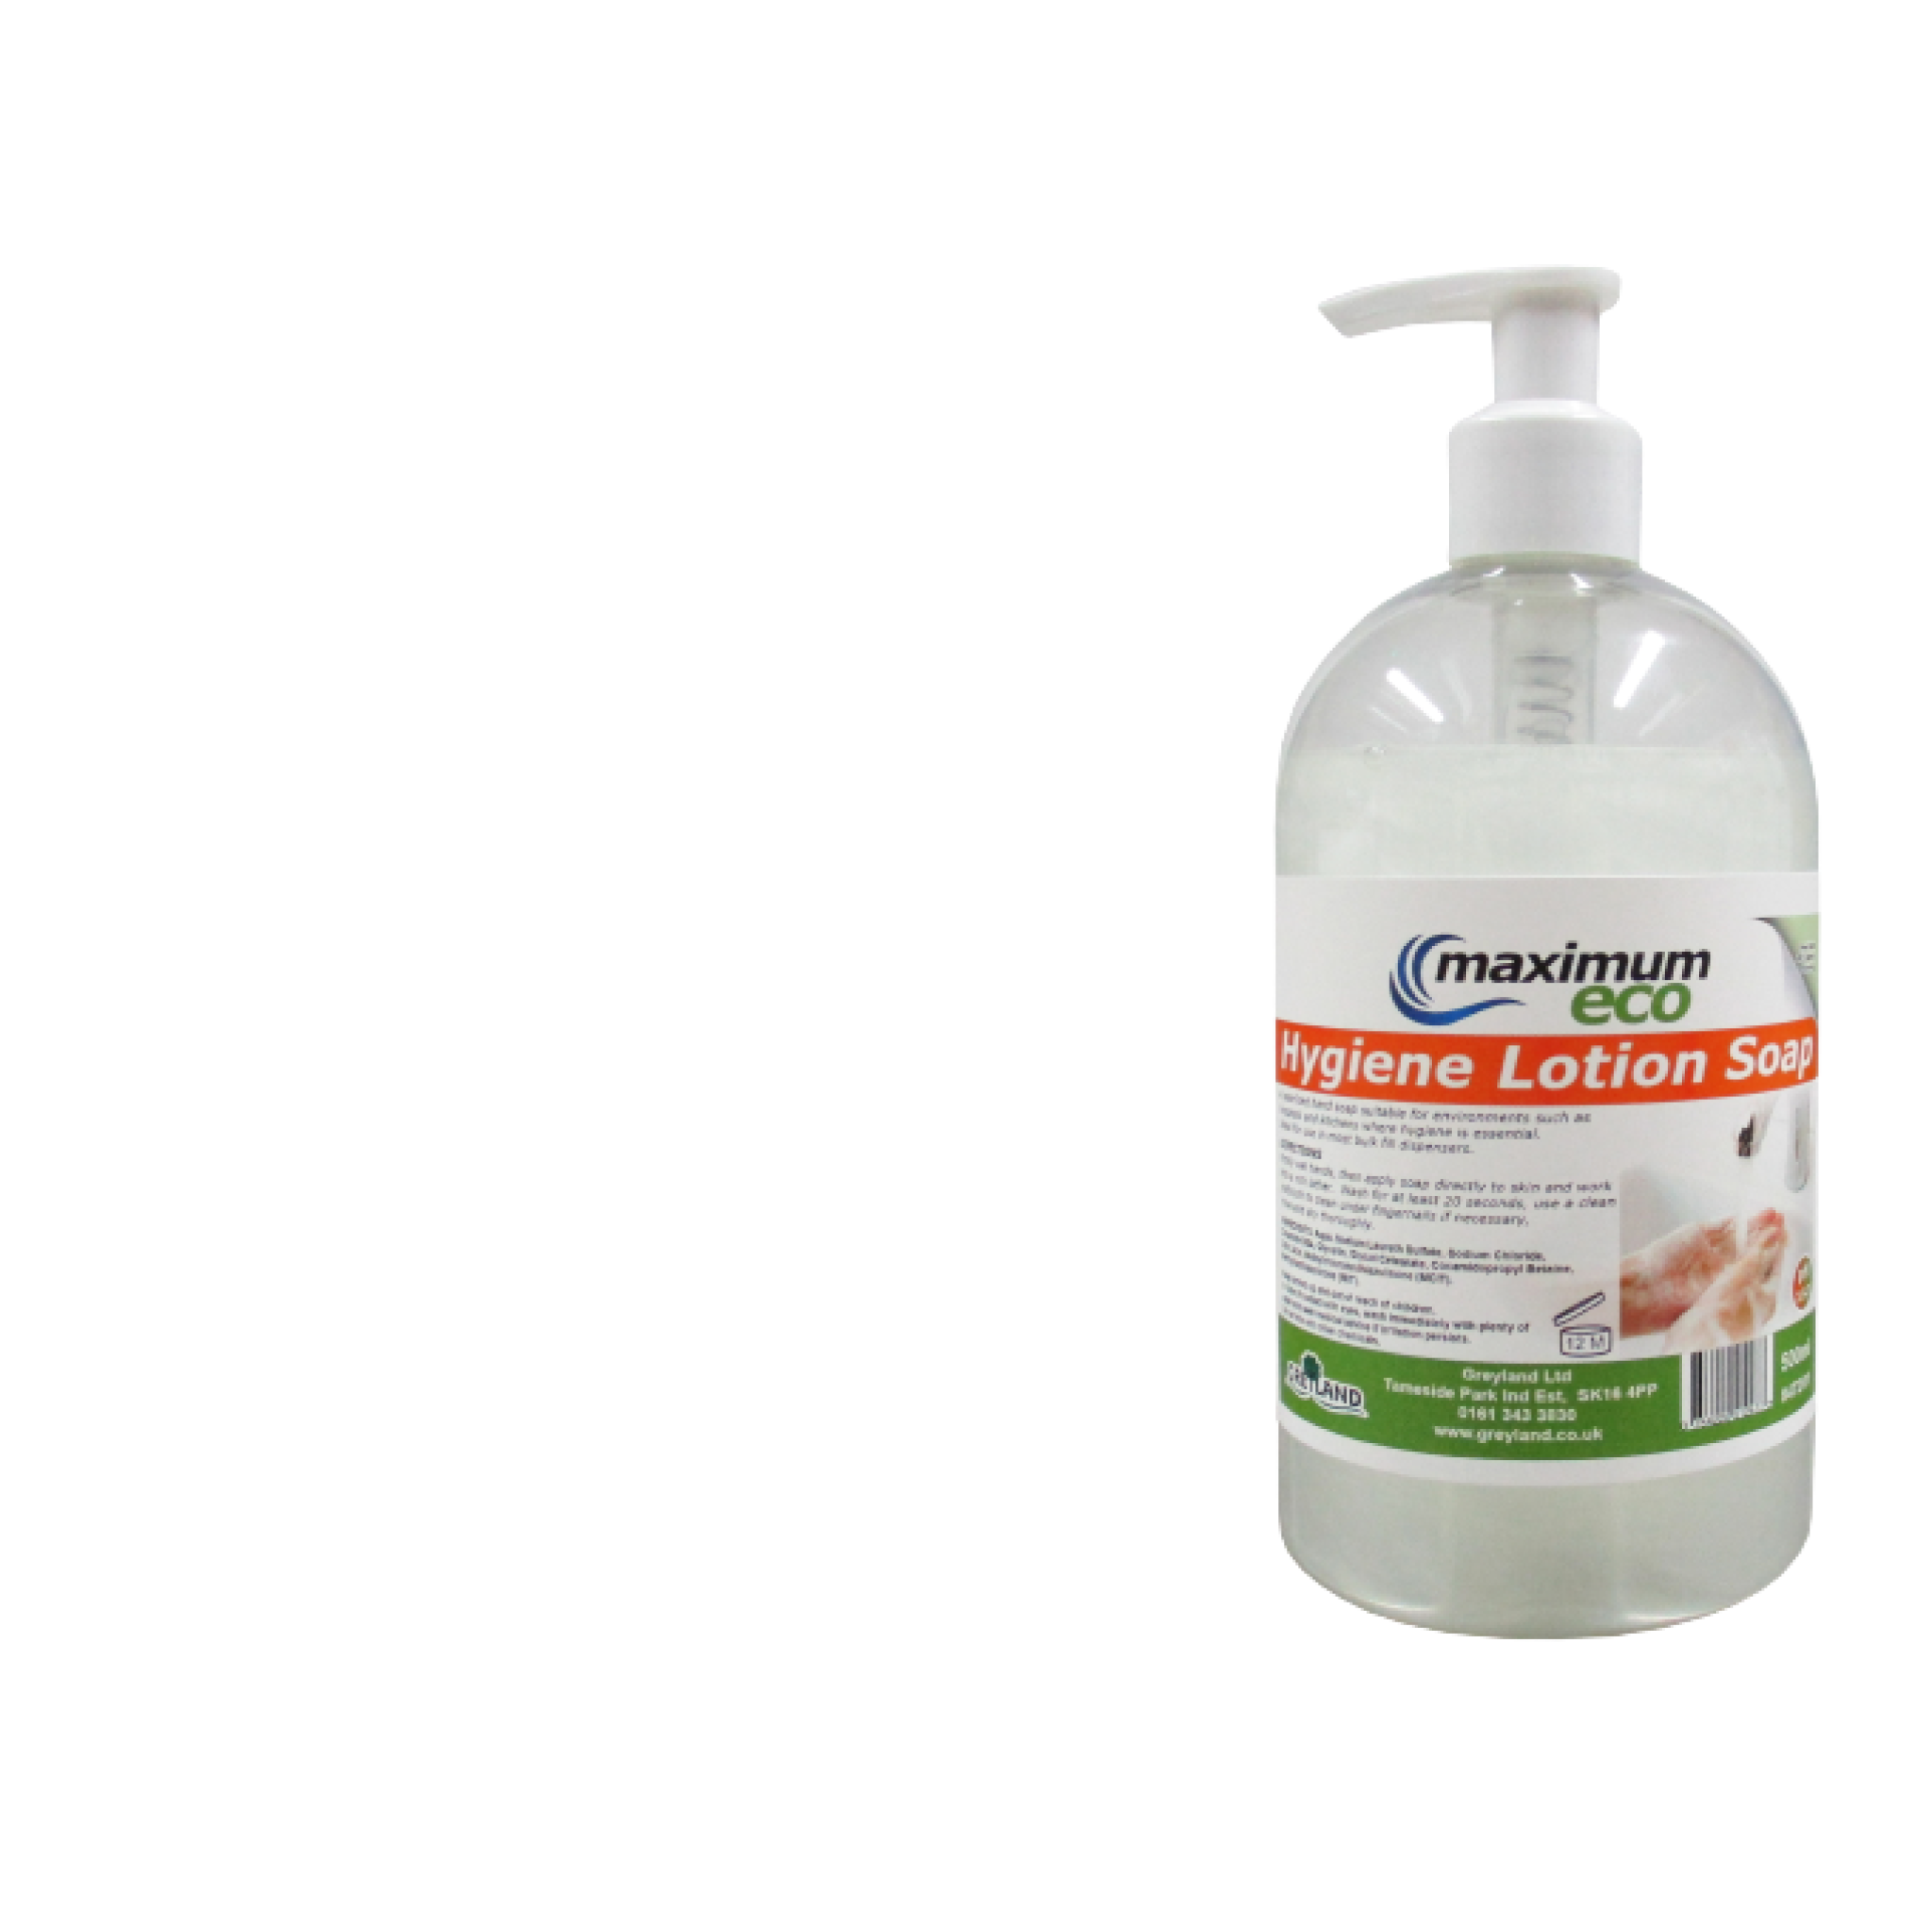 Hygiene_Lotion_Soap_500ml-removebg-preview.png